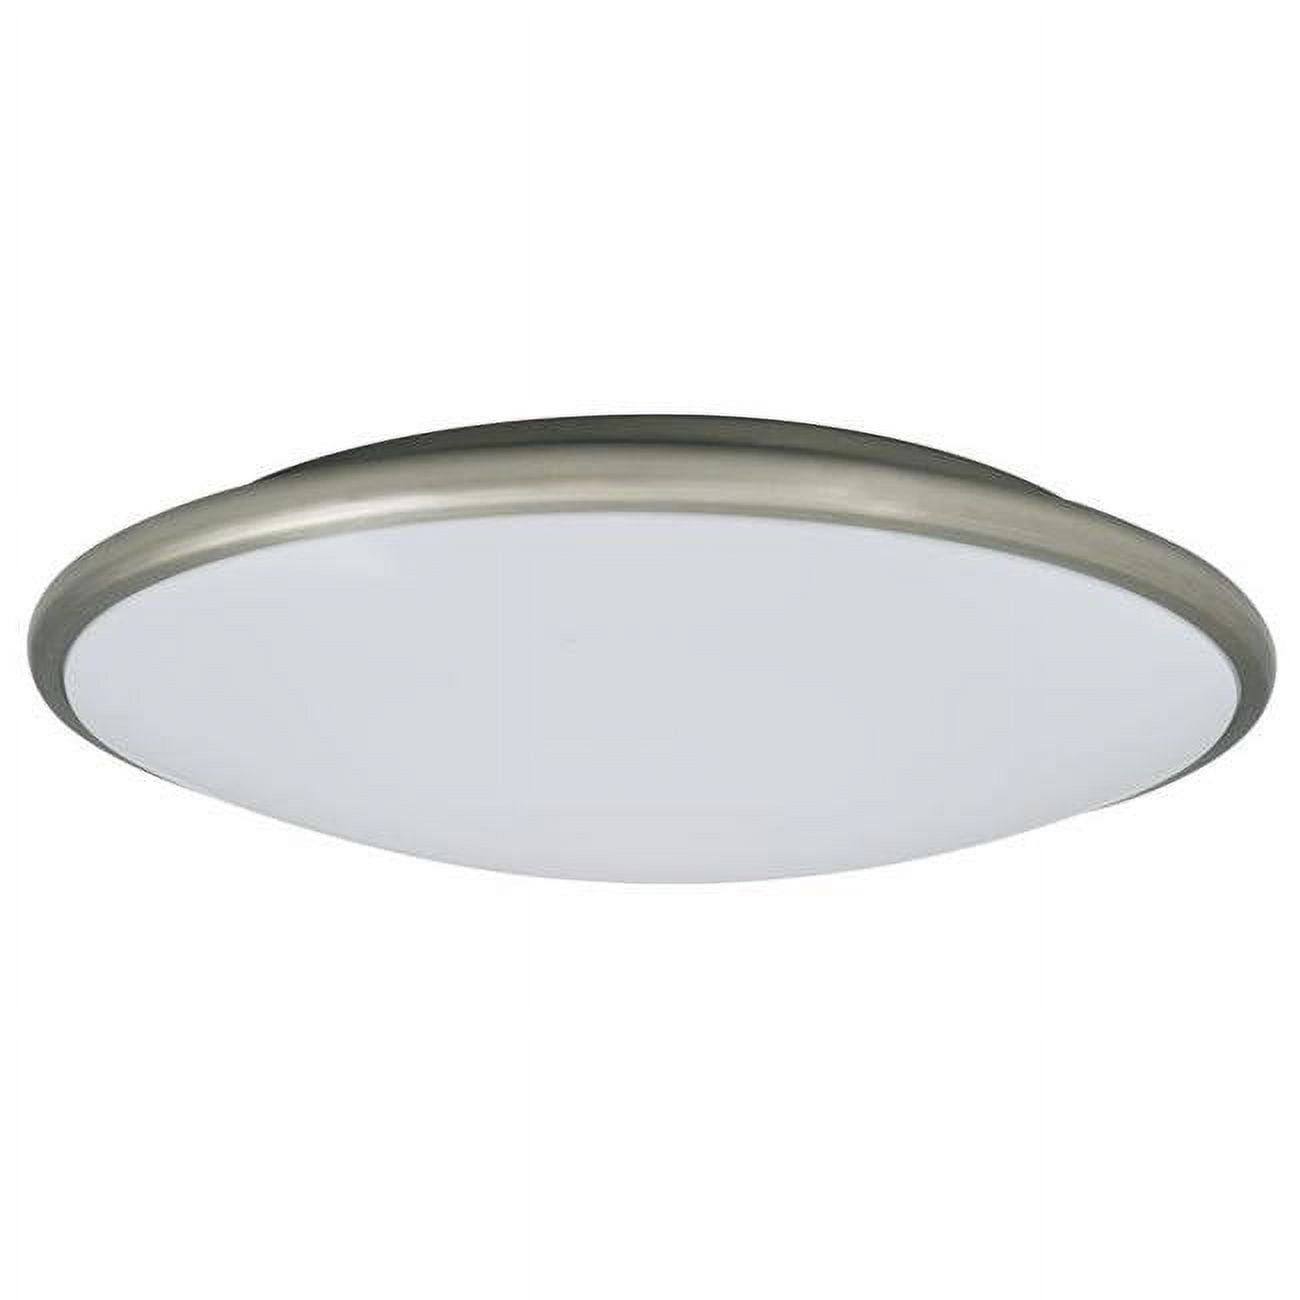 Led-m002lnkl-w 17 X 3.5 In. Led Ceiling Fixture Saucer - Nickel